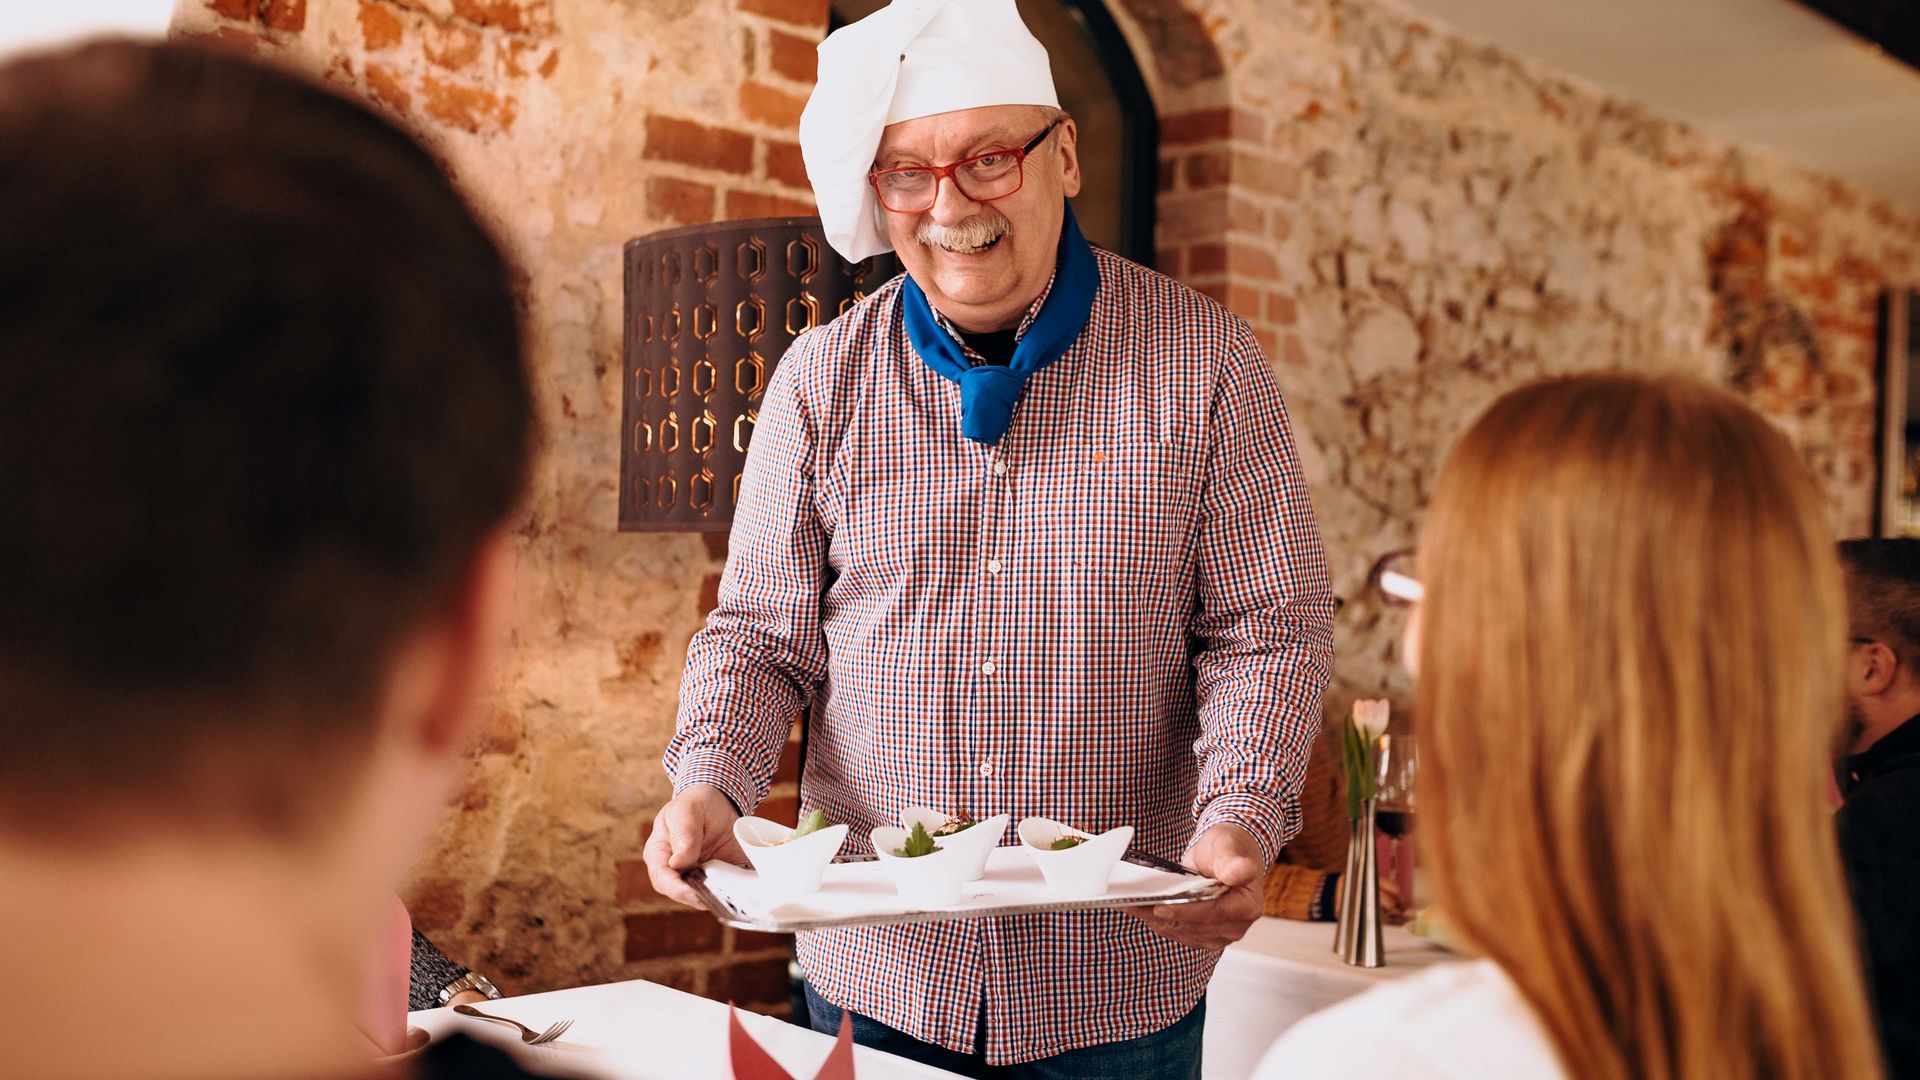 At the Grimma Ratskeller, a couple are shown some appetisers from the kitchen by tour guide and cook Frank Ziegra during a culinary city tour through the restaurants and cafes of Grimma